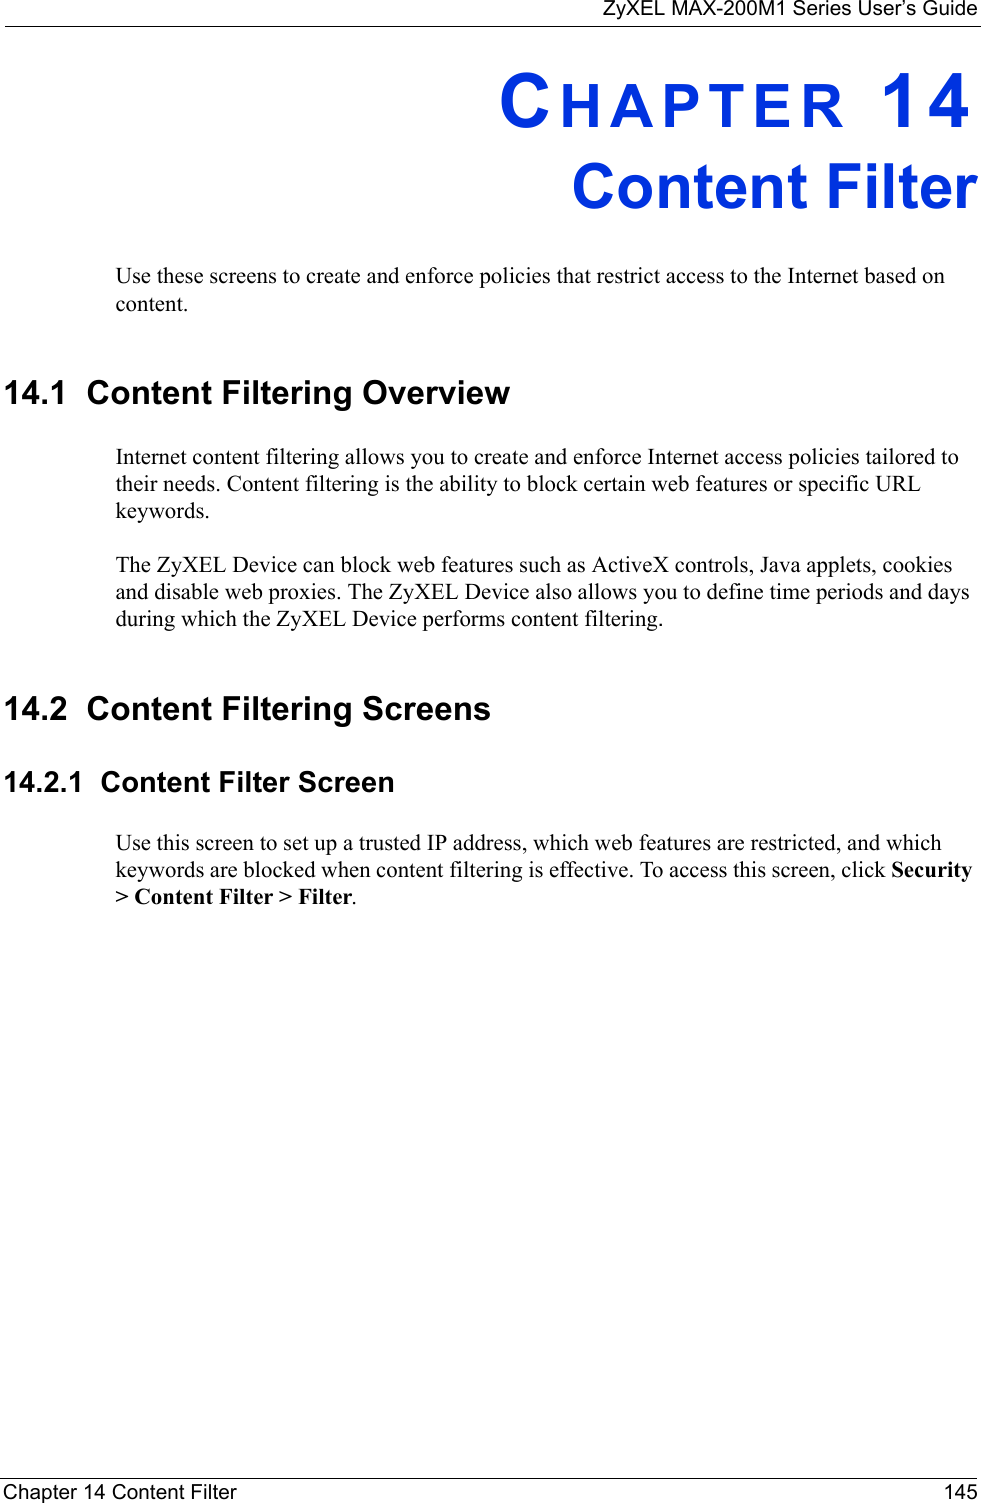 ZyXEL MAX-200M1 Series User’s GuideChapter 14 Content Filter 145CHAPTER 14Content FilterUse these screens to create and enforce policies that restrict access to the Internet based on content.14.1  Content Filtering OverviewInternet content filtering allows you to create and enforce Internet access policies tailored to their needs. Content filtering is the ability to block certain web features or specific URL keywords.The ZyXEL Device can block web features such as ActiveX controls, Java applets, cookies and disable web proxies. The ZyXEL Device also allows you to define time periods and days during which the ZyXEL Device performs content filtering.14.2  Content Filtering Screens14.2.1  Content Filter ScreenUse this screen to set up a trusted IP address, which web features are restricted, and which keywords are blocked when content filtering is effective. To access this screen, click Security &gt; Content Filter &gt; Filter.